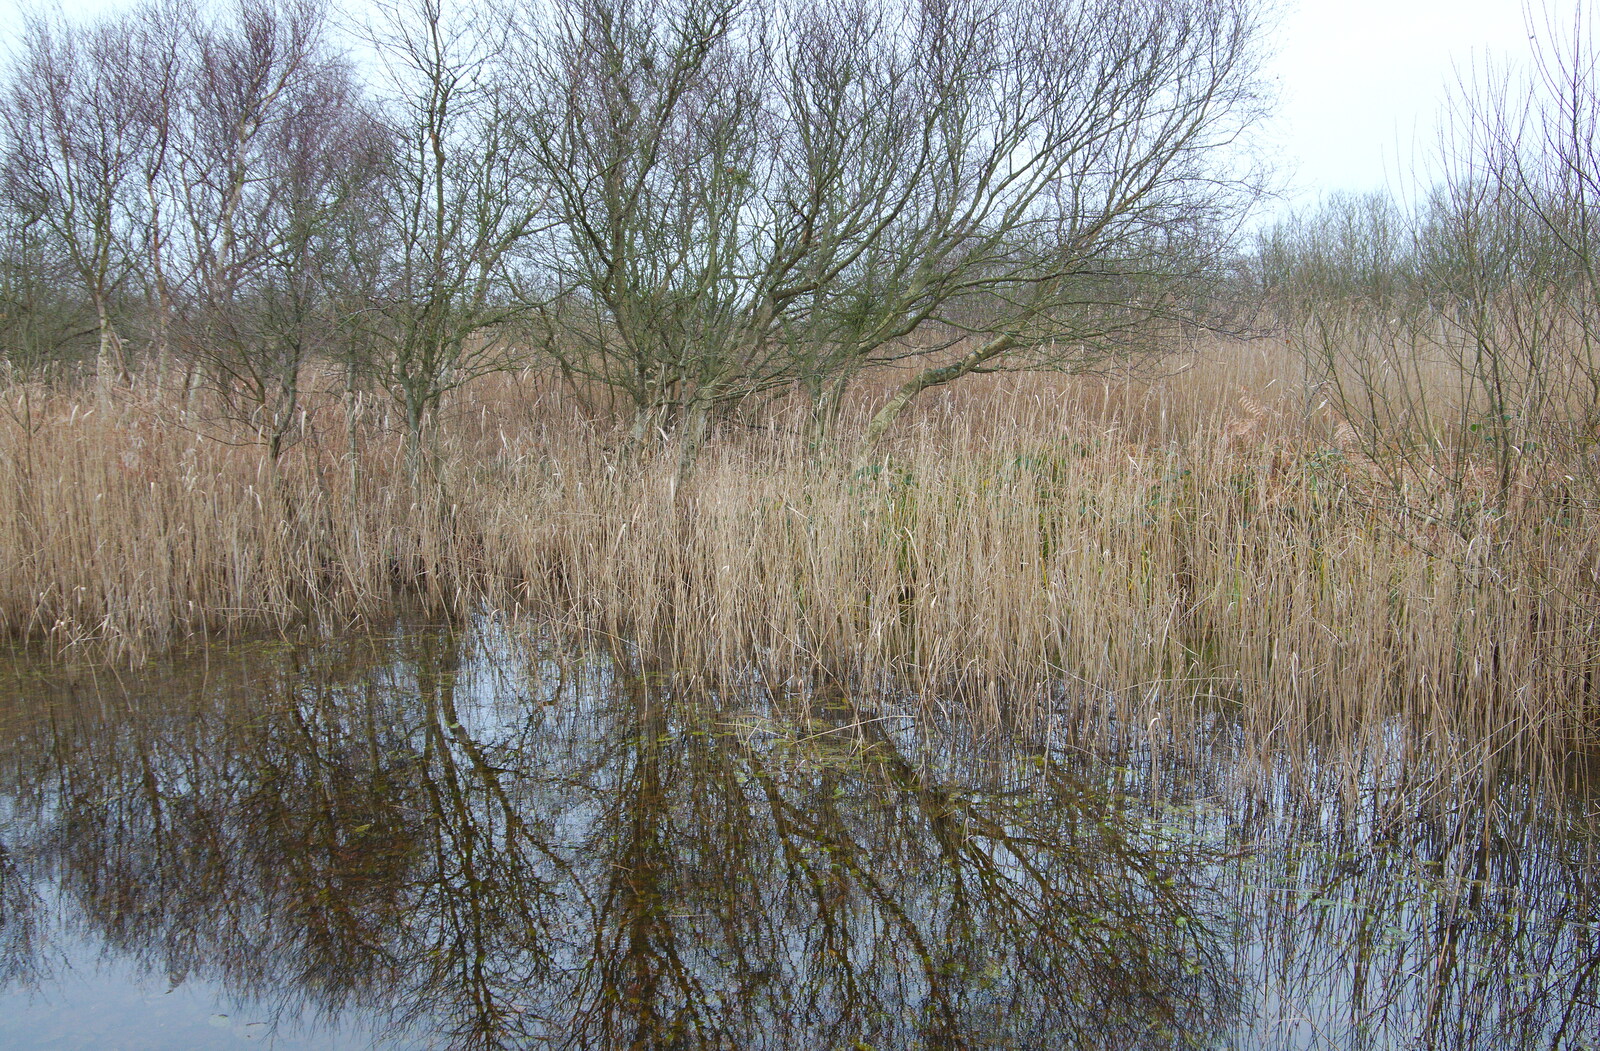 Trees reflected in a pond from A Trip to the Beach, Dunwich Heath, Suffolk - 27th December 2019